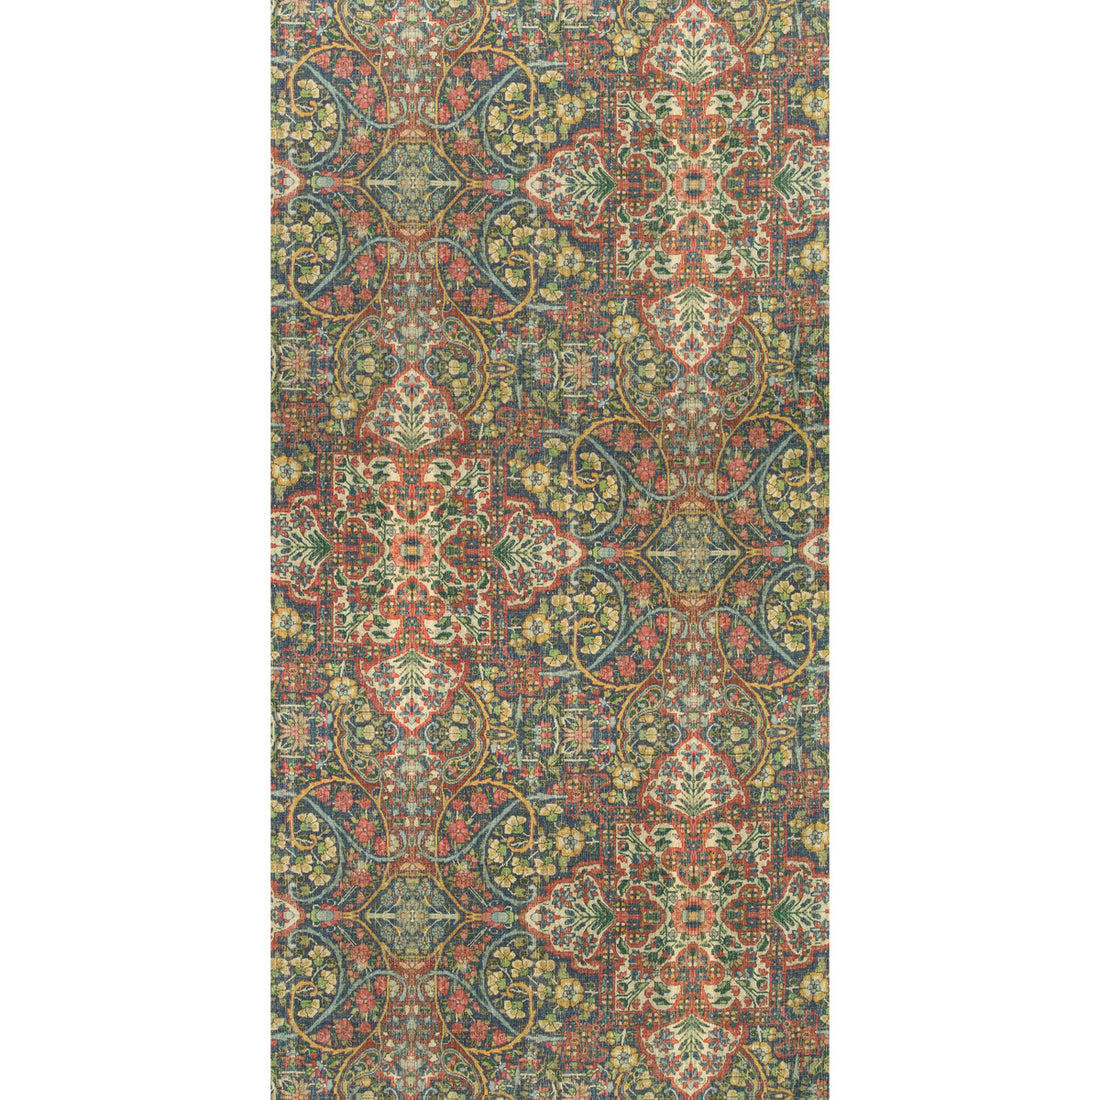 Bromley Print fabric in multi color - pattern 2019109.195.0 - by Lee Jofa in the Manor House collection